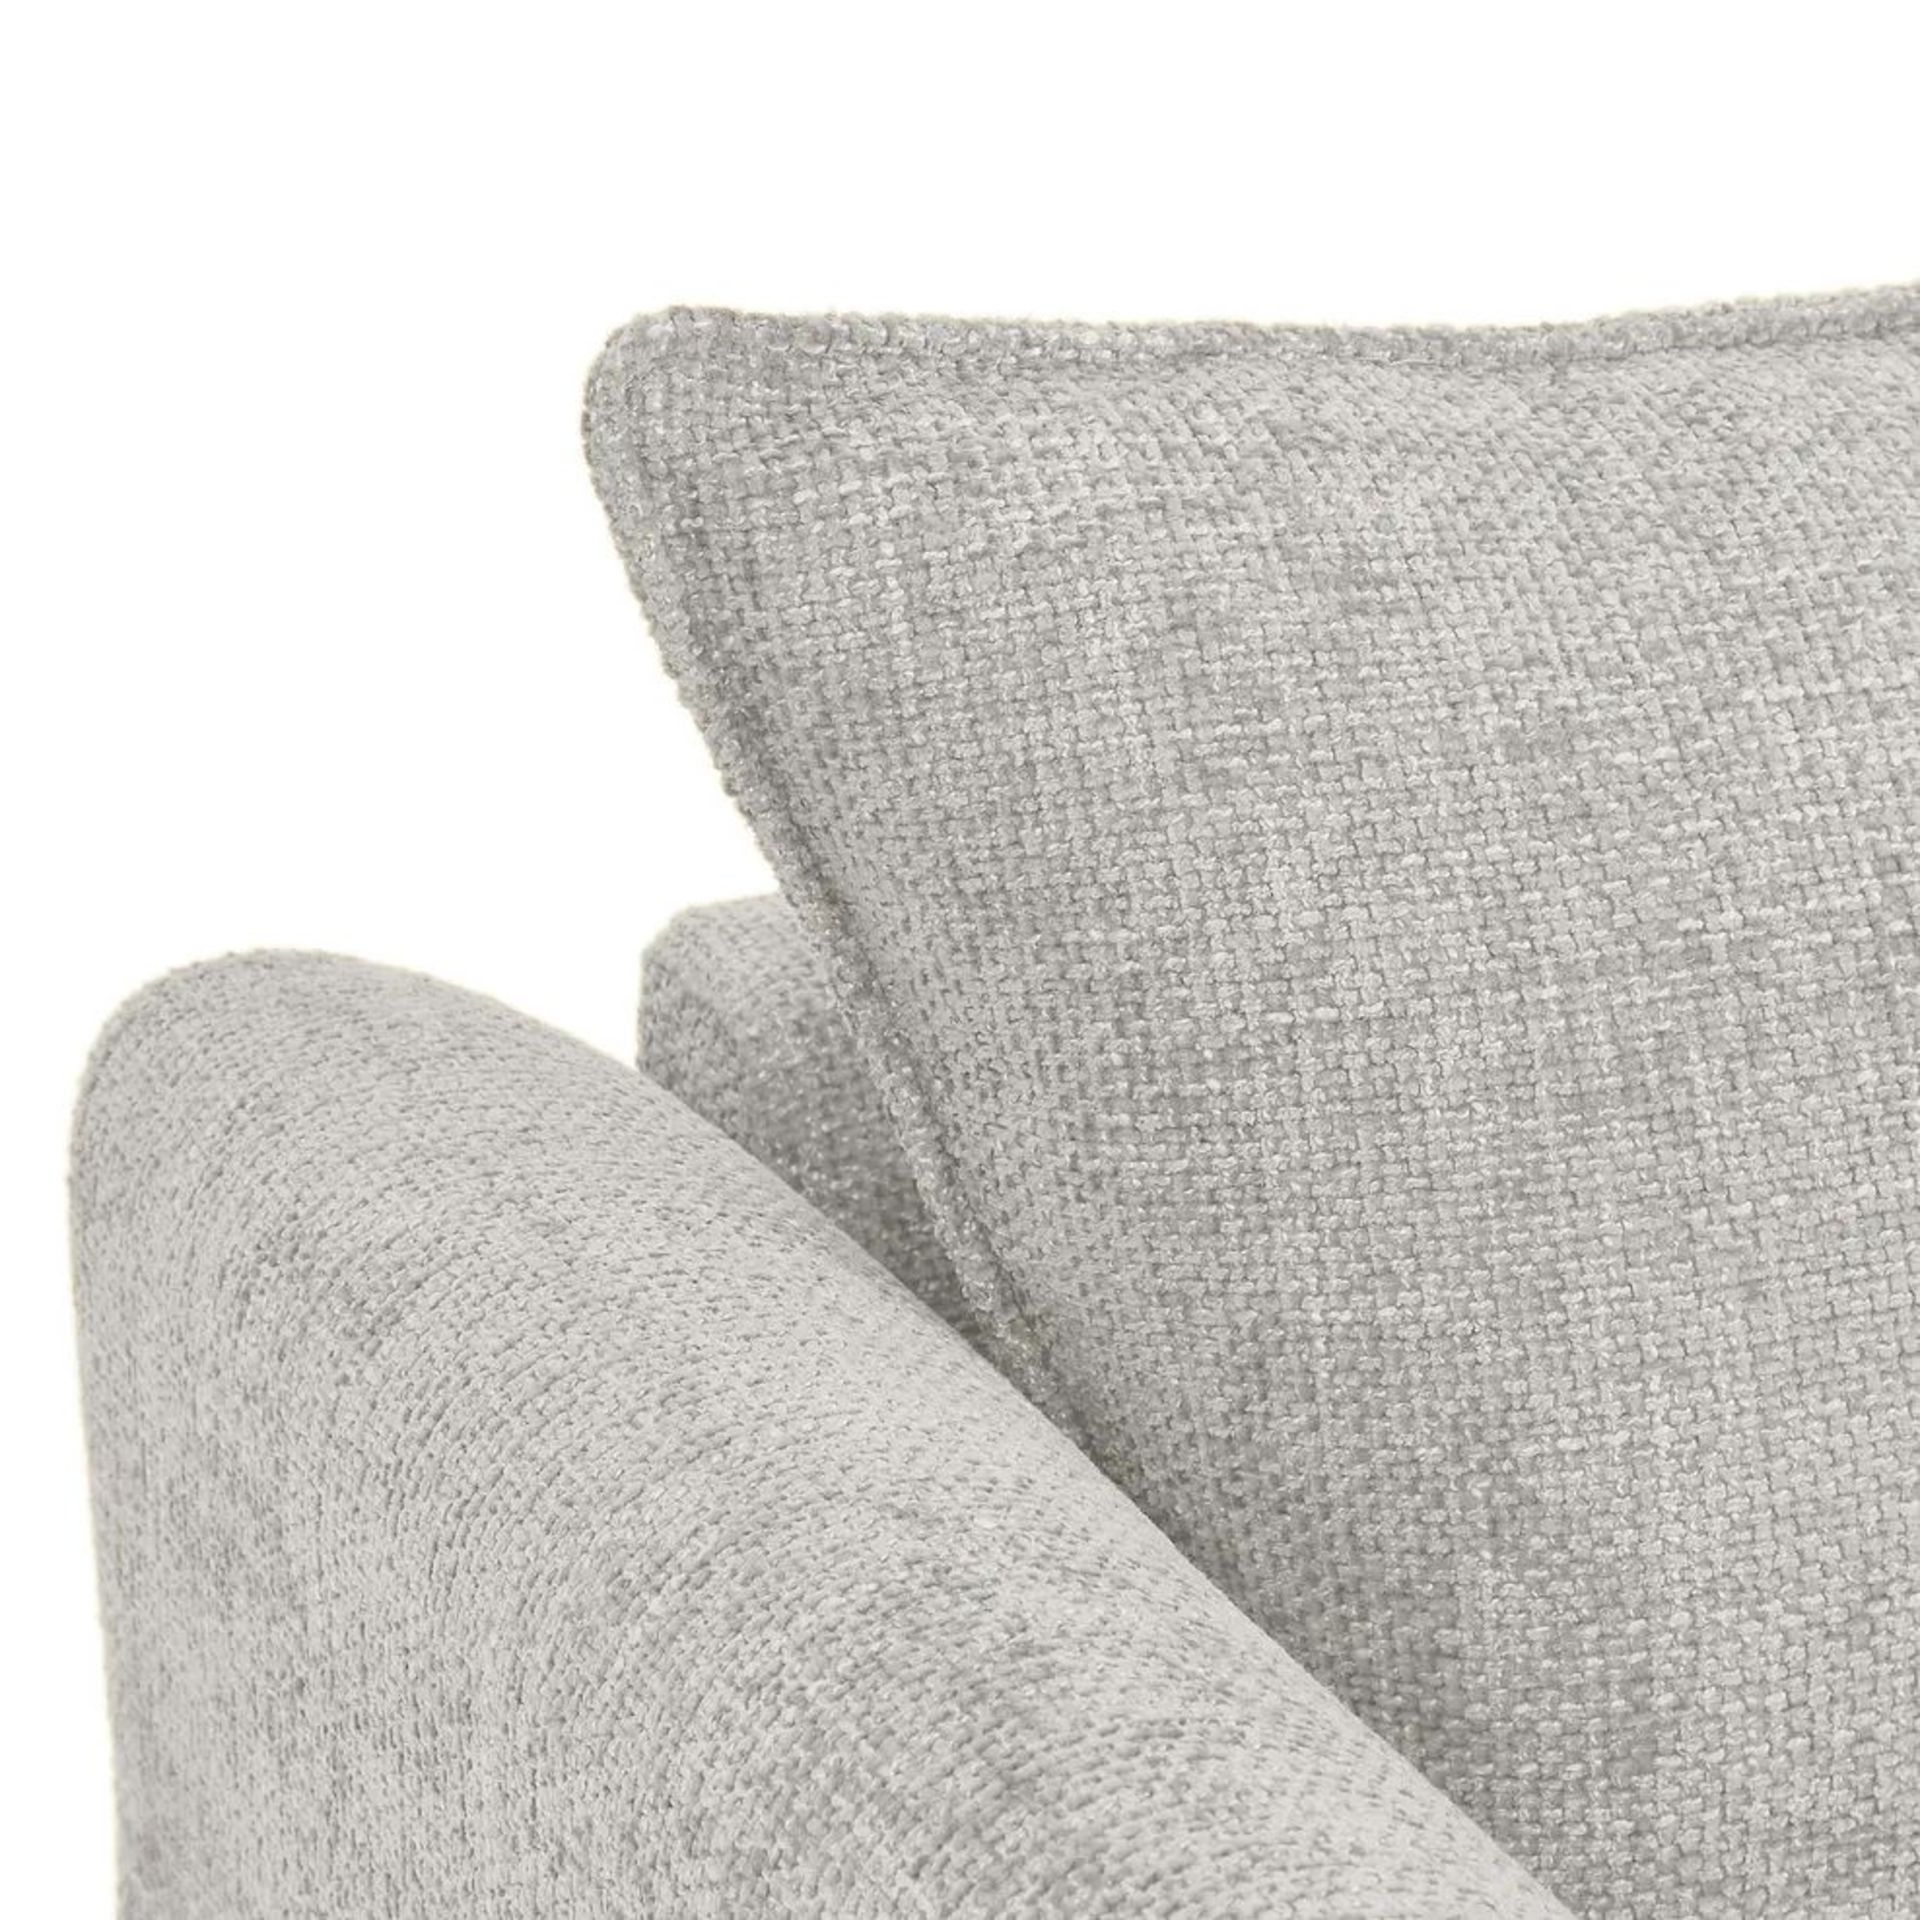 BRAND NEW DALBY 2 Seater Sofa - SILVER FABRIC. RRP £1569. Our Dalby 2-seater sofa, shown here in - Image 8 of 8